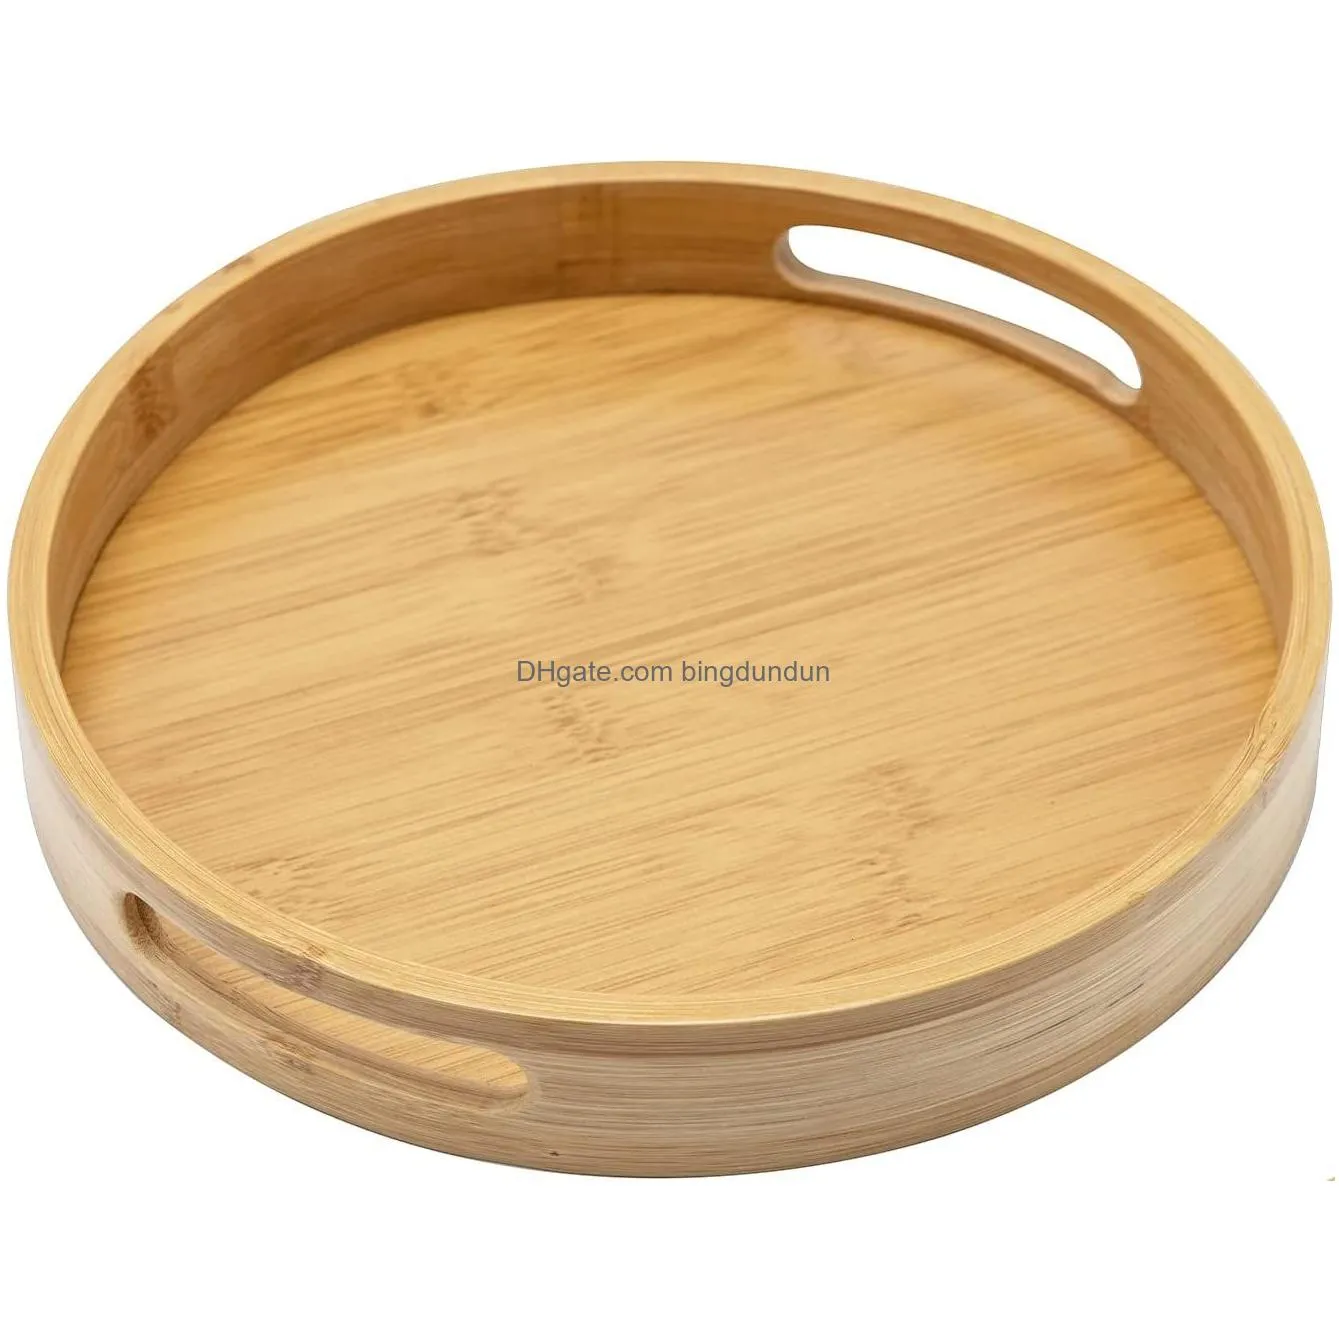 tableware cut out handles dining room party bamboo wood natural round food storage home dessert bread serving tray raised edge